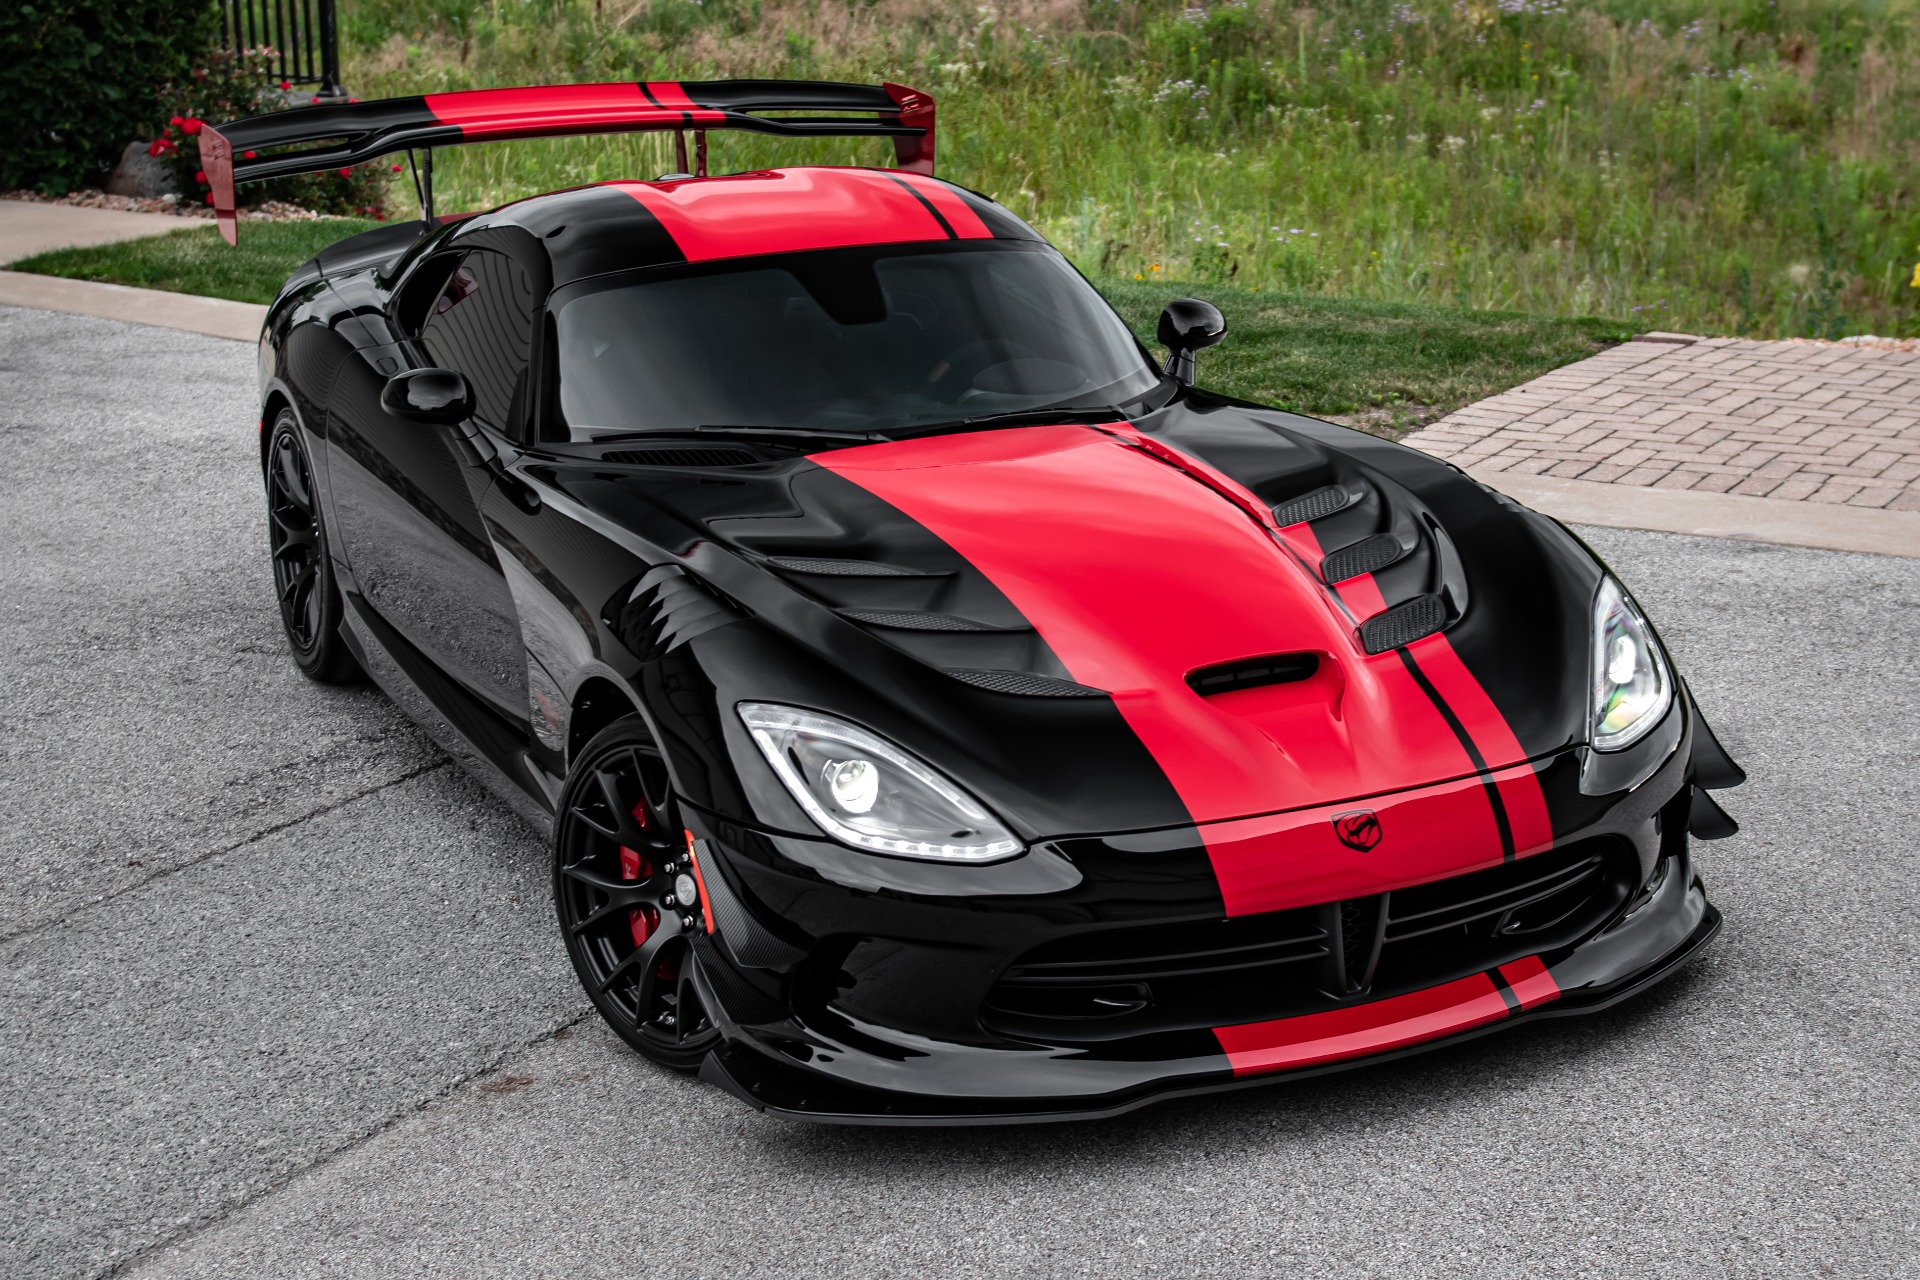 Used 17 Dodge Viper Acr 1 28 Edition 2 Miles Extreme Aero Pkg Signed By Factory For Sale Special Pricing Chicago Motor Cars Stock